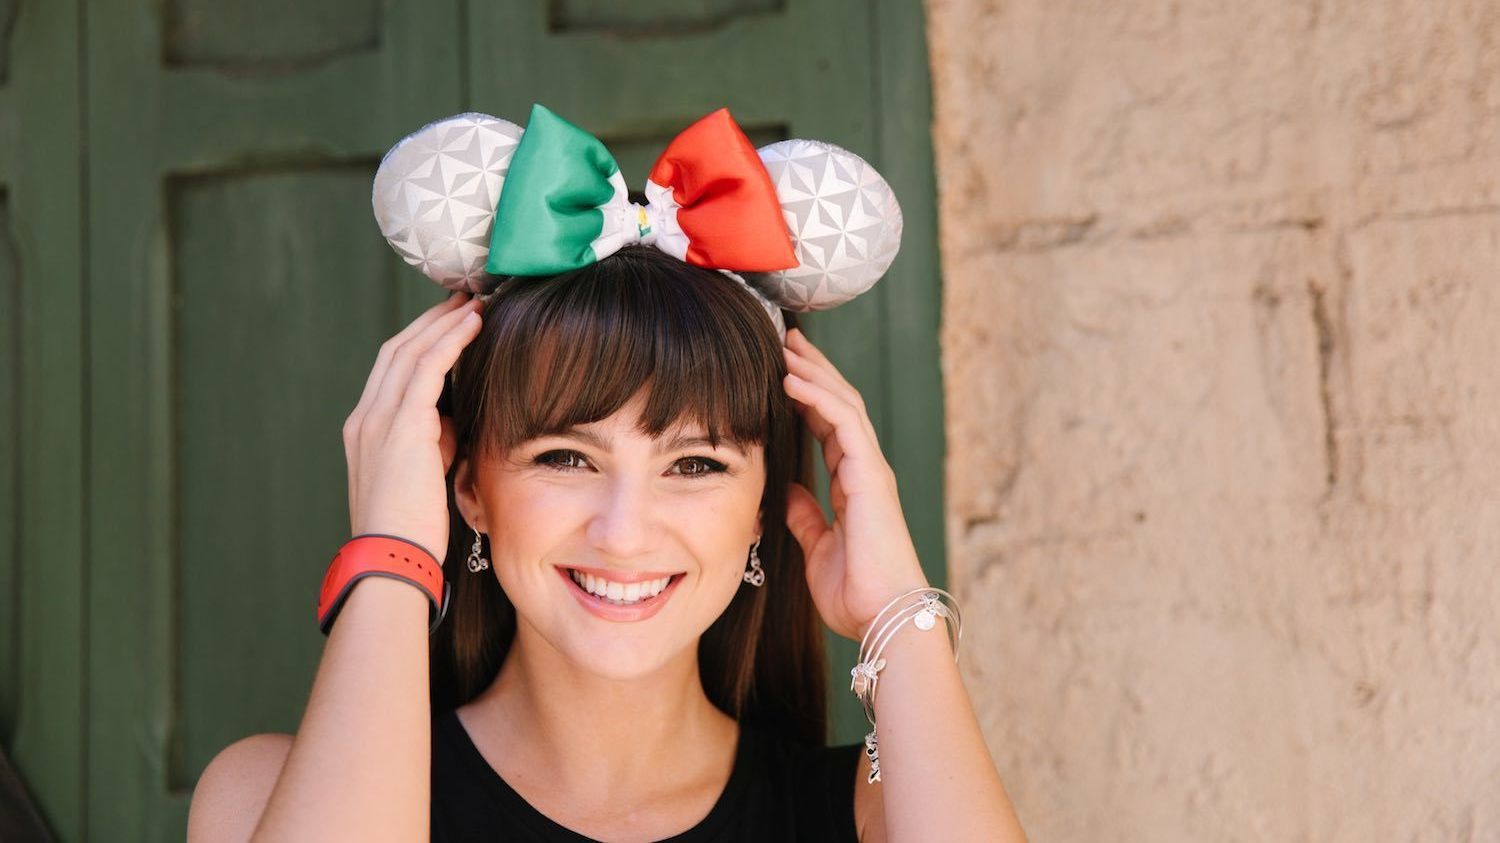 If You're a Fan of Epcot, You're Going to Be Obsessed With These New Ears